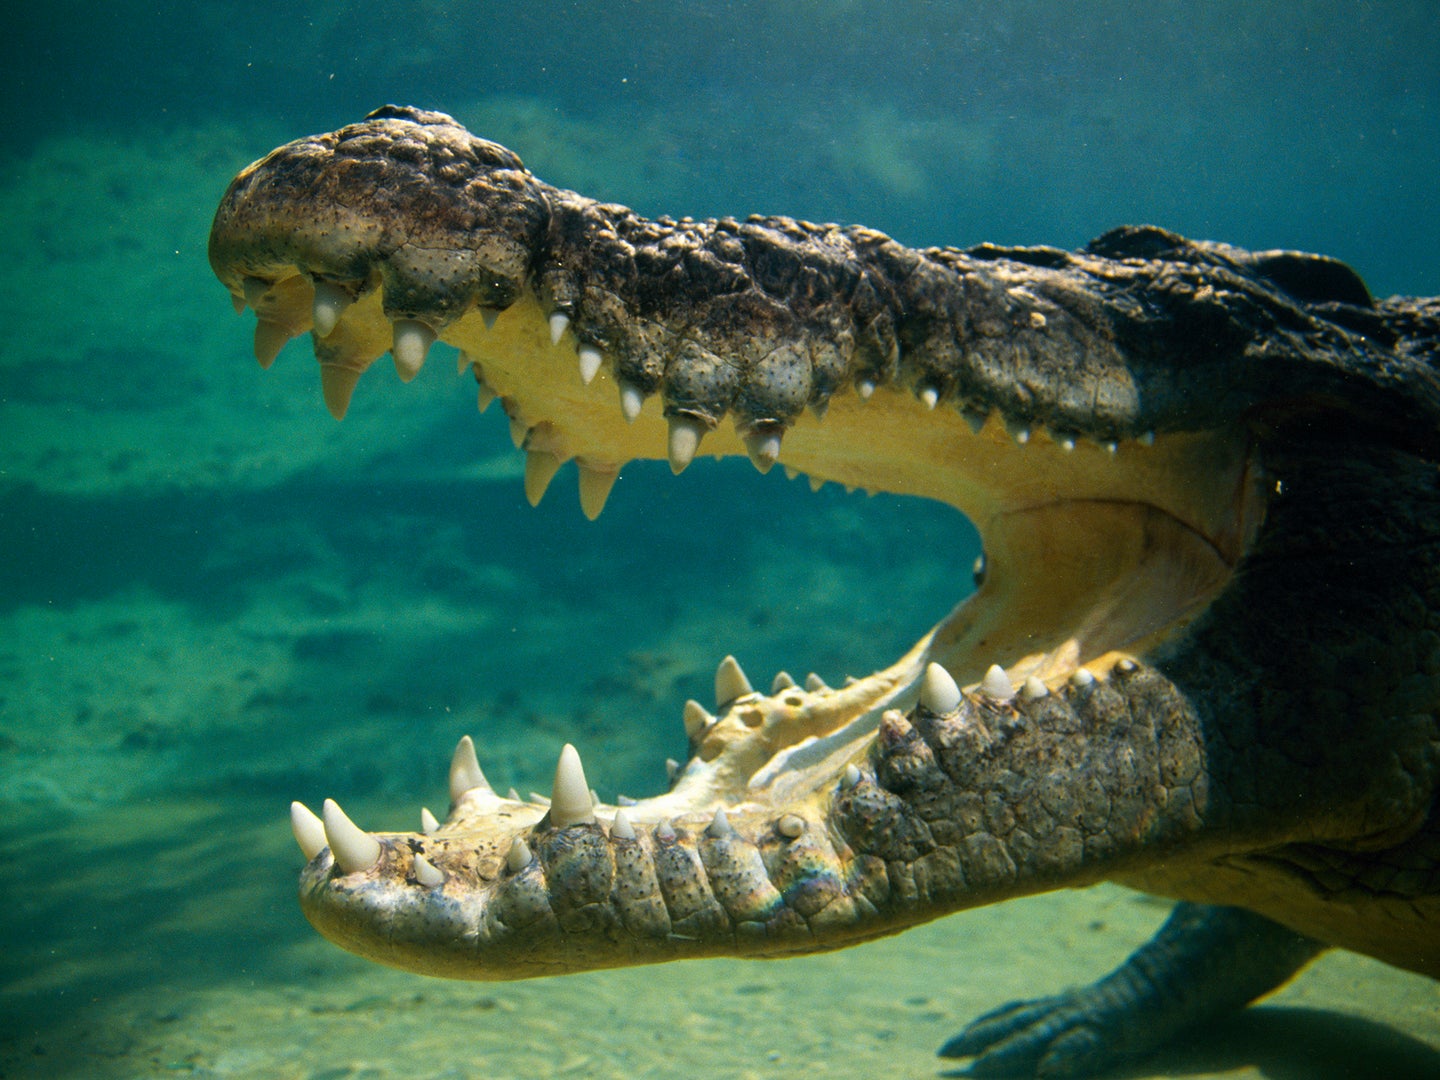 A photo of a crocodile underwater with its mouth wide open.